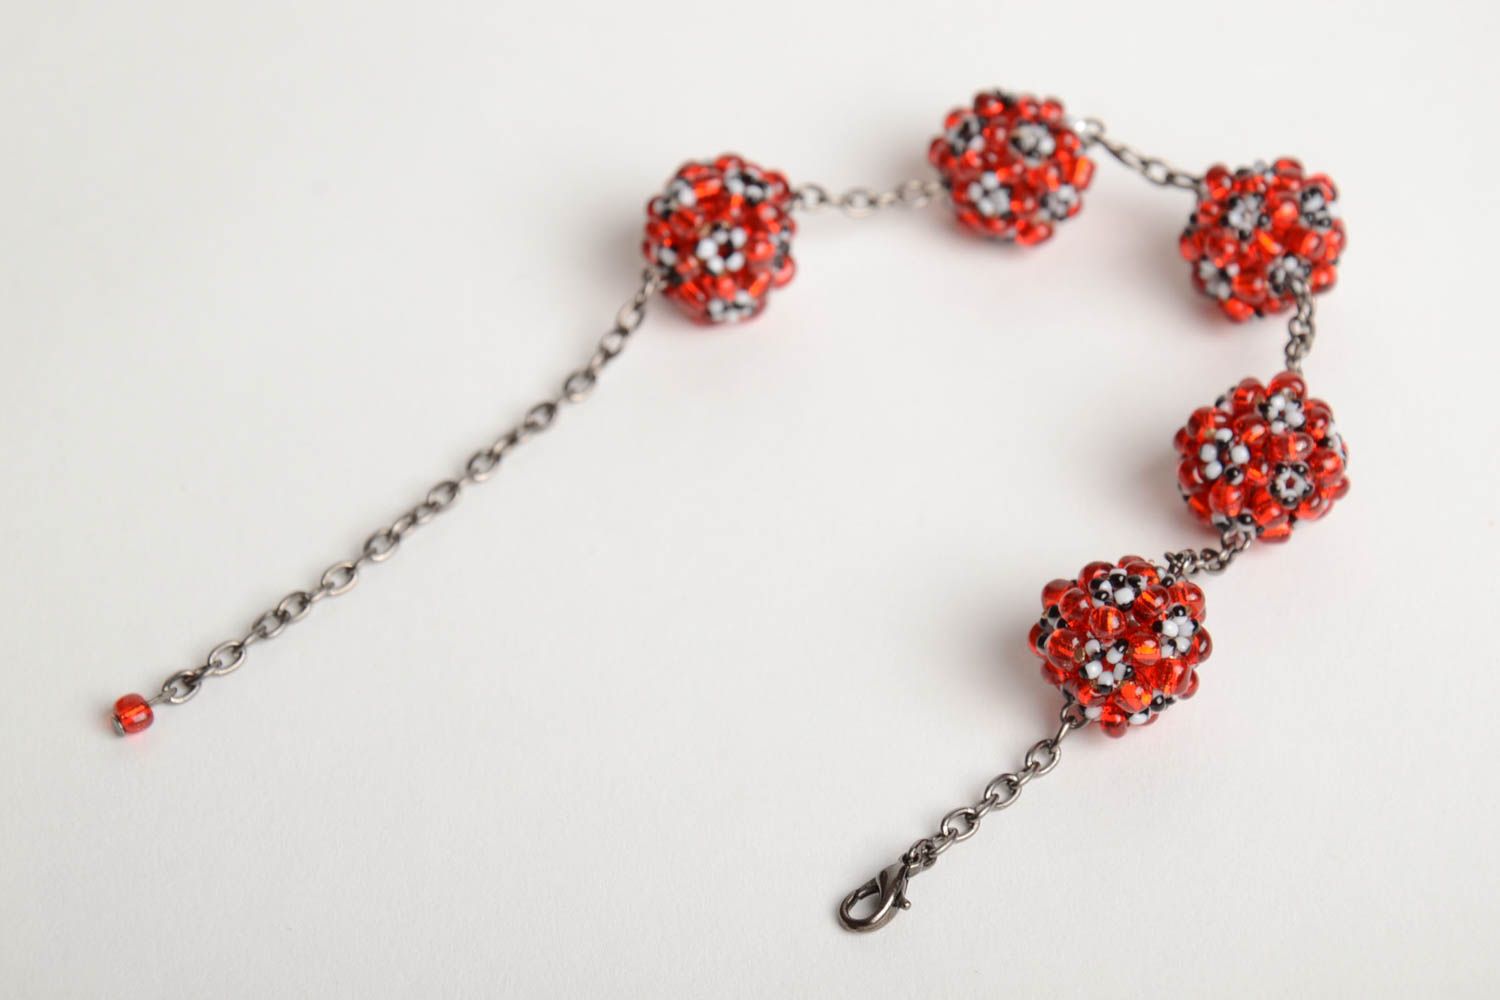 Handmade metal chain women's wrist bracelet with red and white bead woven balls photo 4